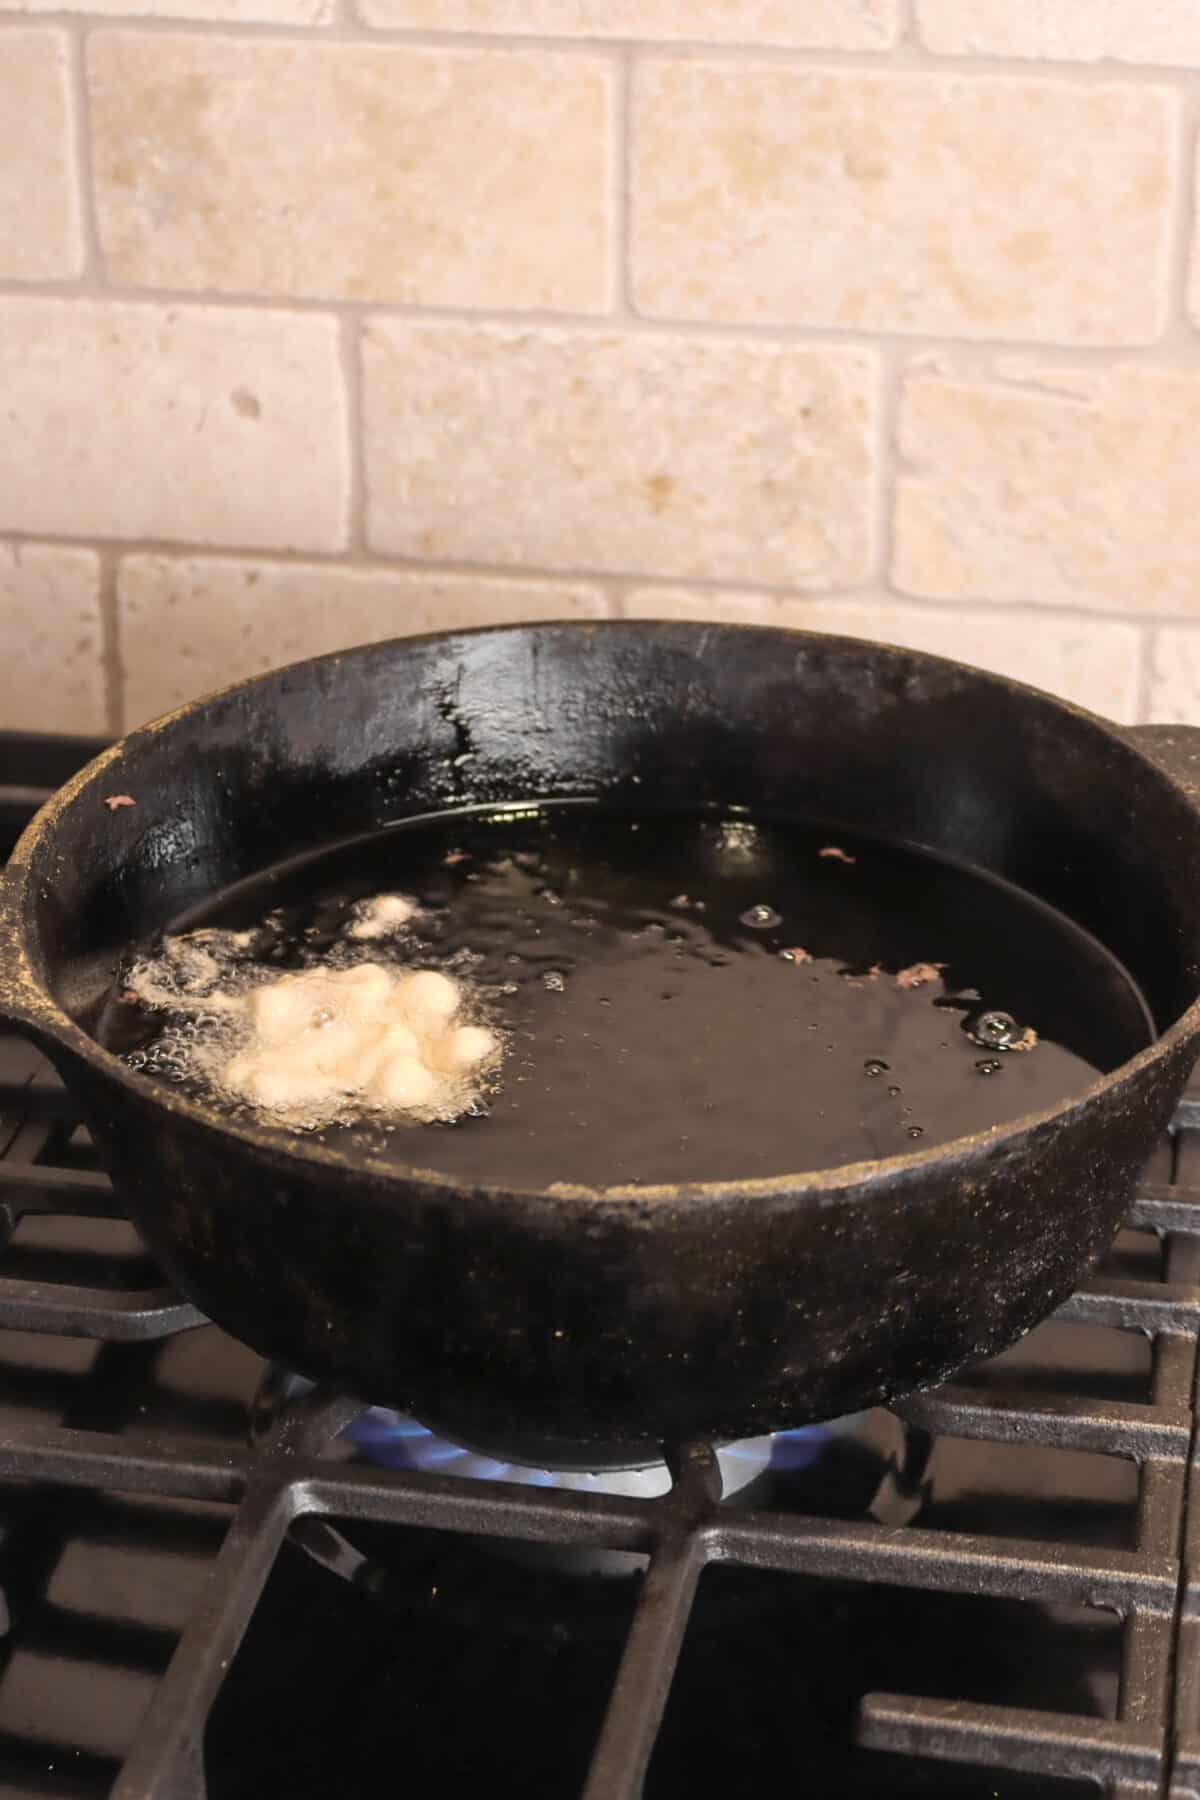 fritter batter being fried in oil